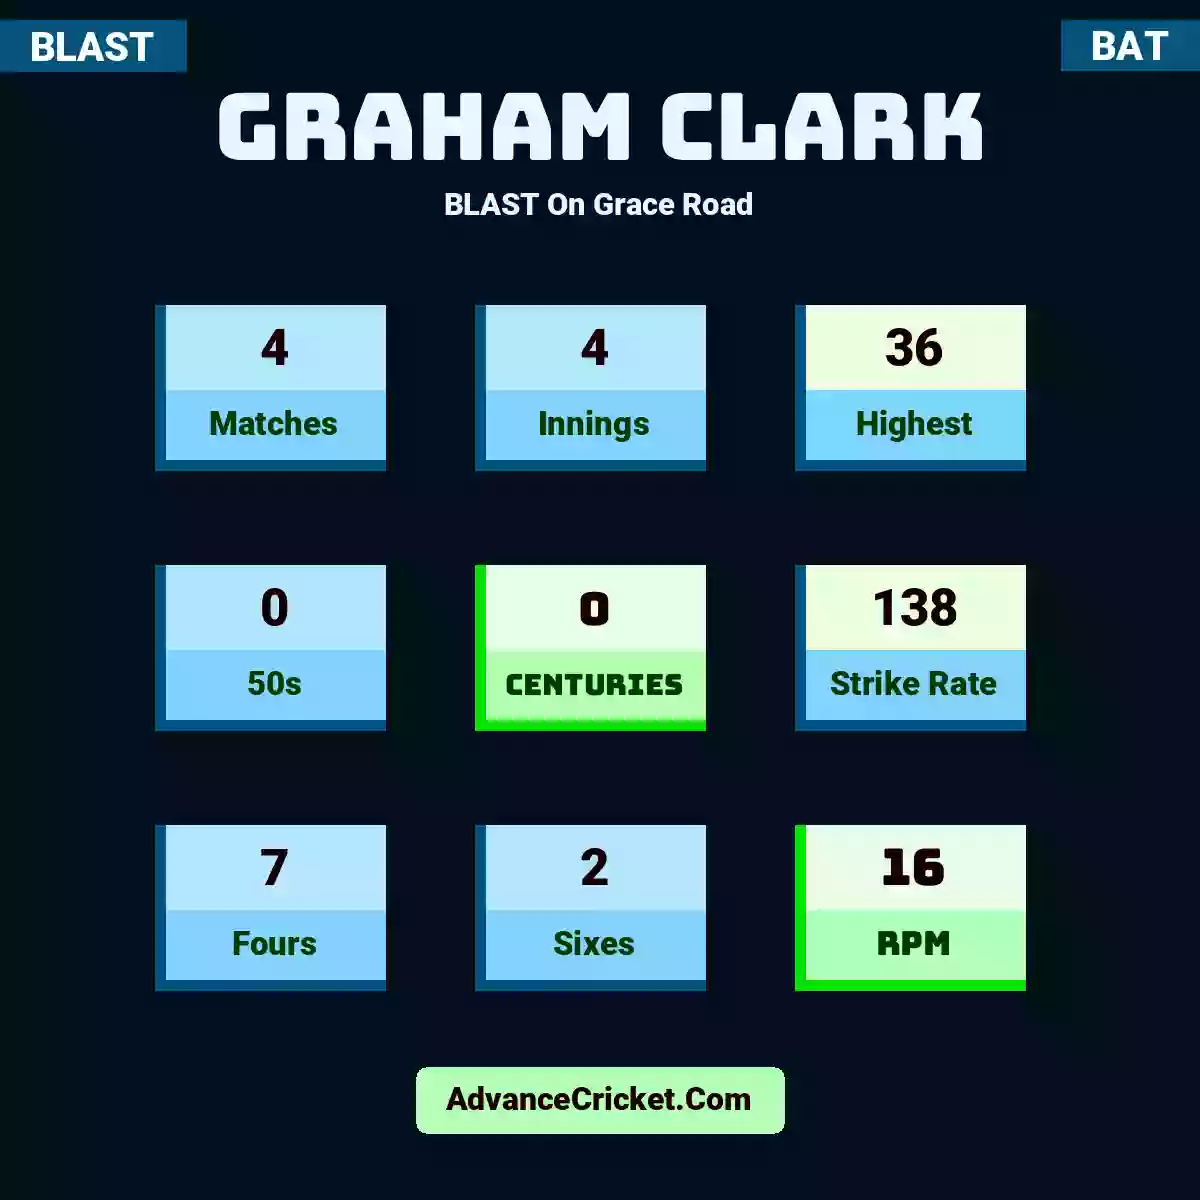 Graham Clark BLAST  On Grace Road, Graham Clark played 4 matches, scored 36 runs as highest, 0 half-centuries, and 0 centuries, with a strike rate of 138. G.Clark hit 7 fours and 2 sixes, with an RPM of 16.